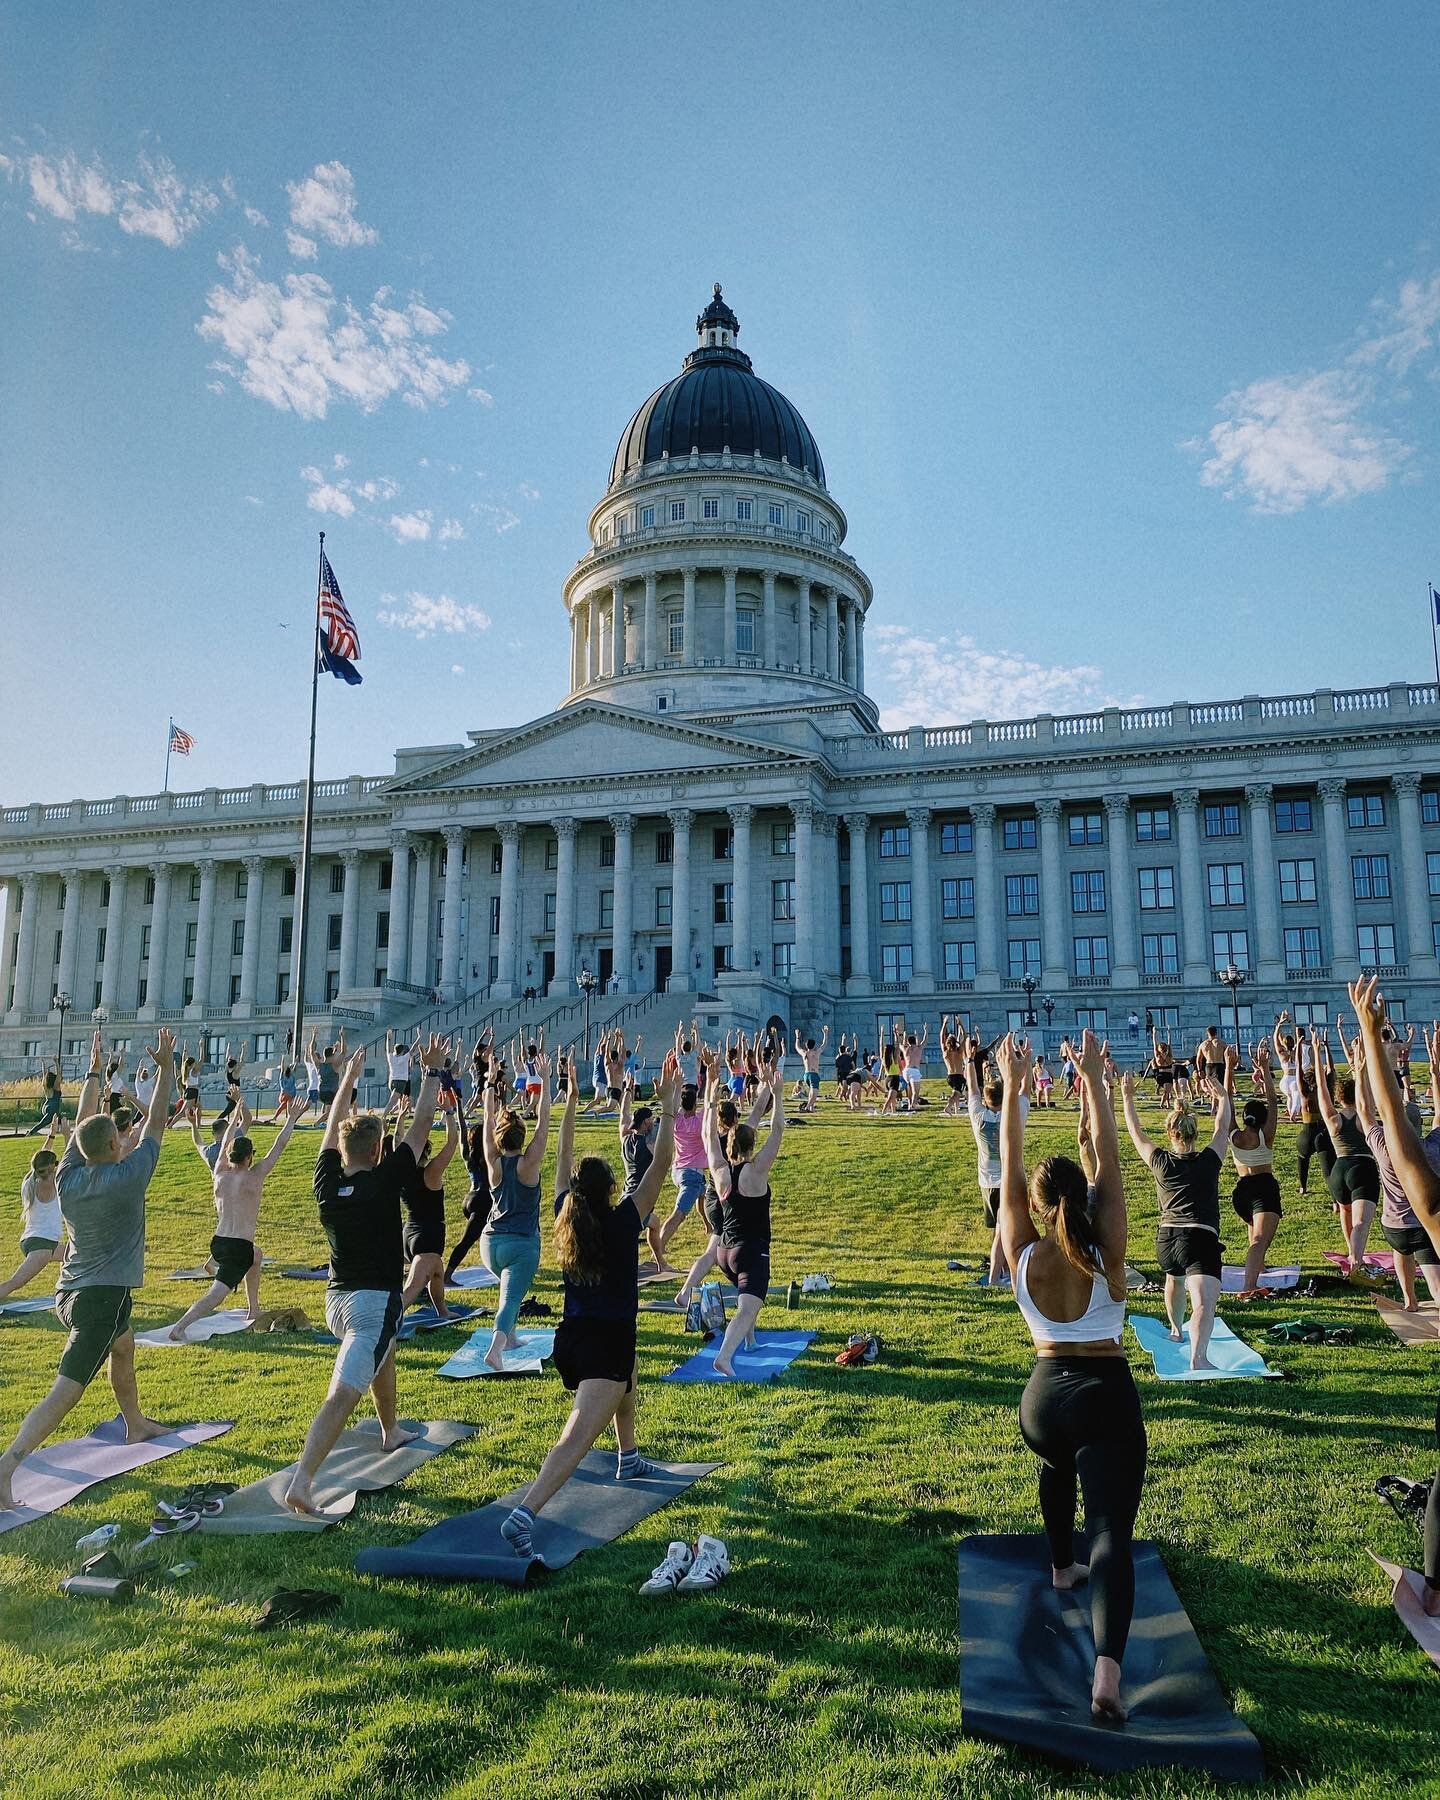 Y O G A at the Capitol. (2.0!)
@saltlakepoweryoga x @lululemon 

Coming together feels good. Meeting new people feels good. Having friends that&rsquo;ll carpool and drive from another county to support you feels good. Moving your body feels good. Res